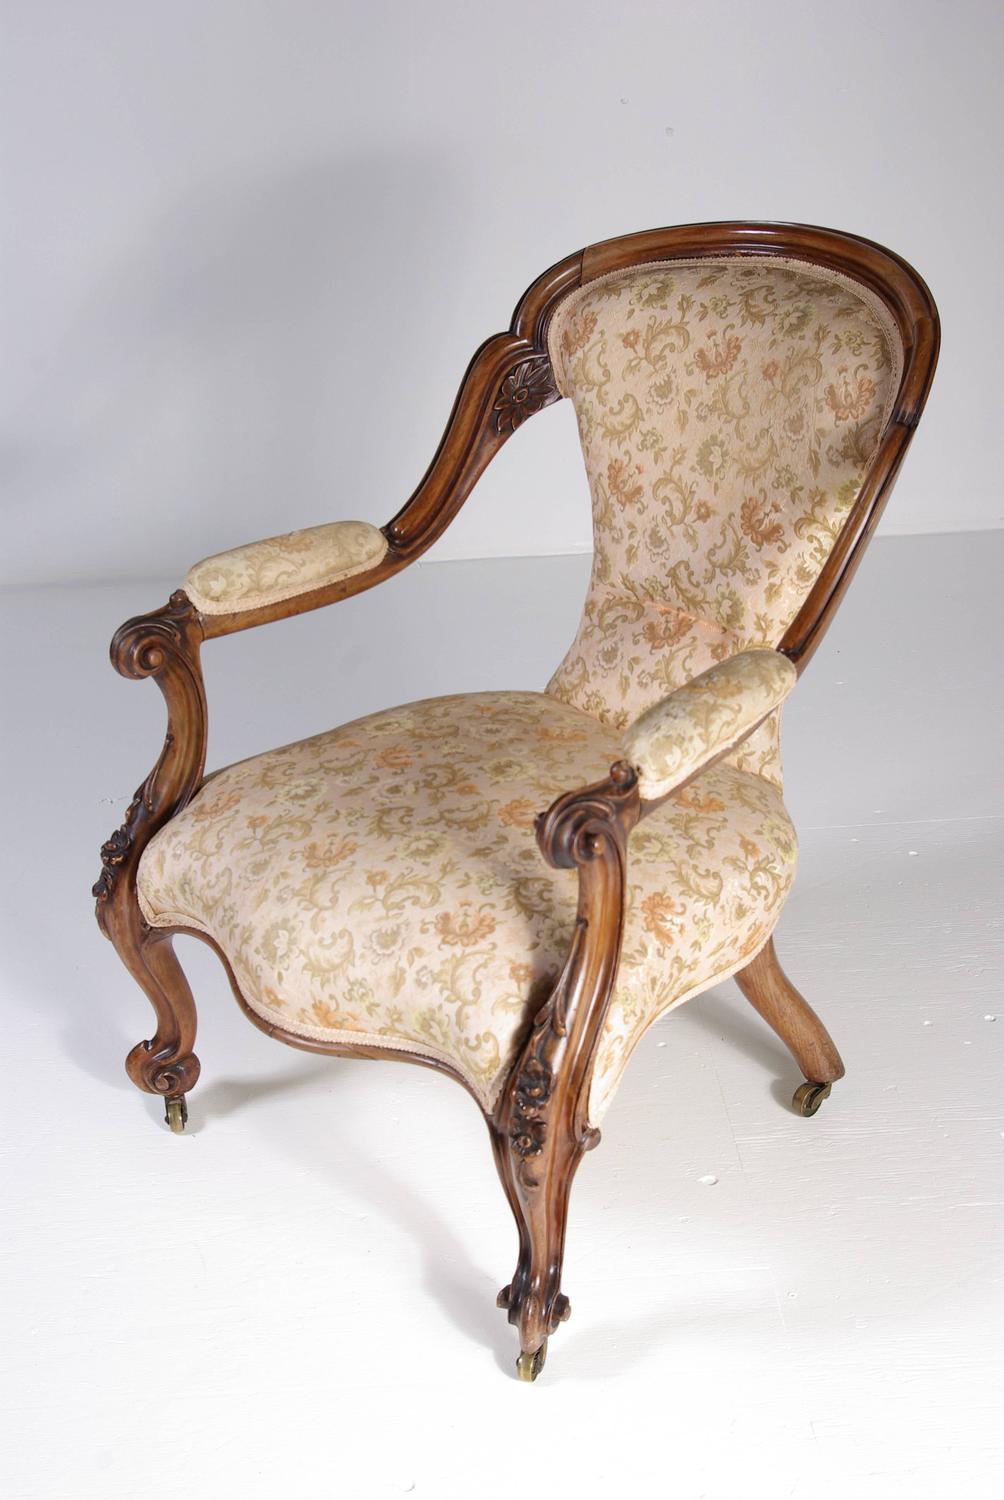 Antique Scottish 19th Century Victorian Solid Rosewood Chair, Cabriolet